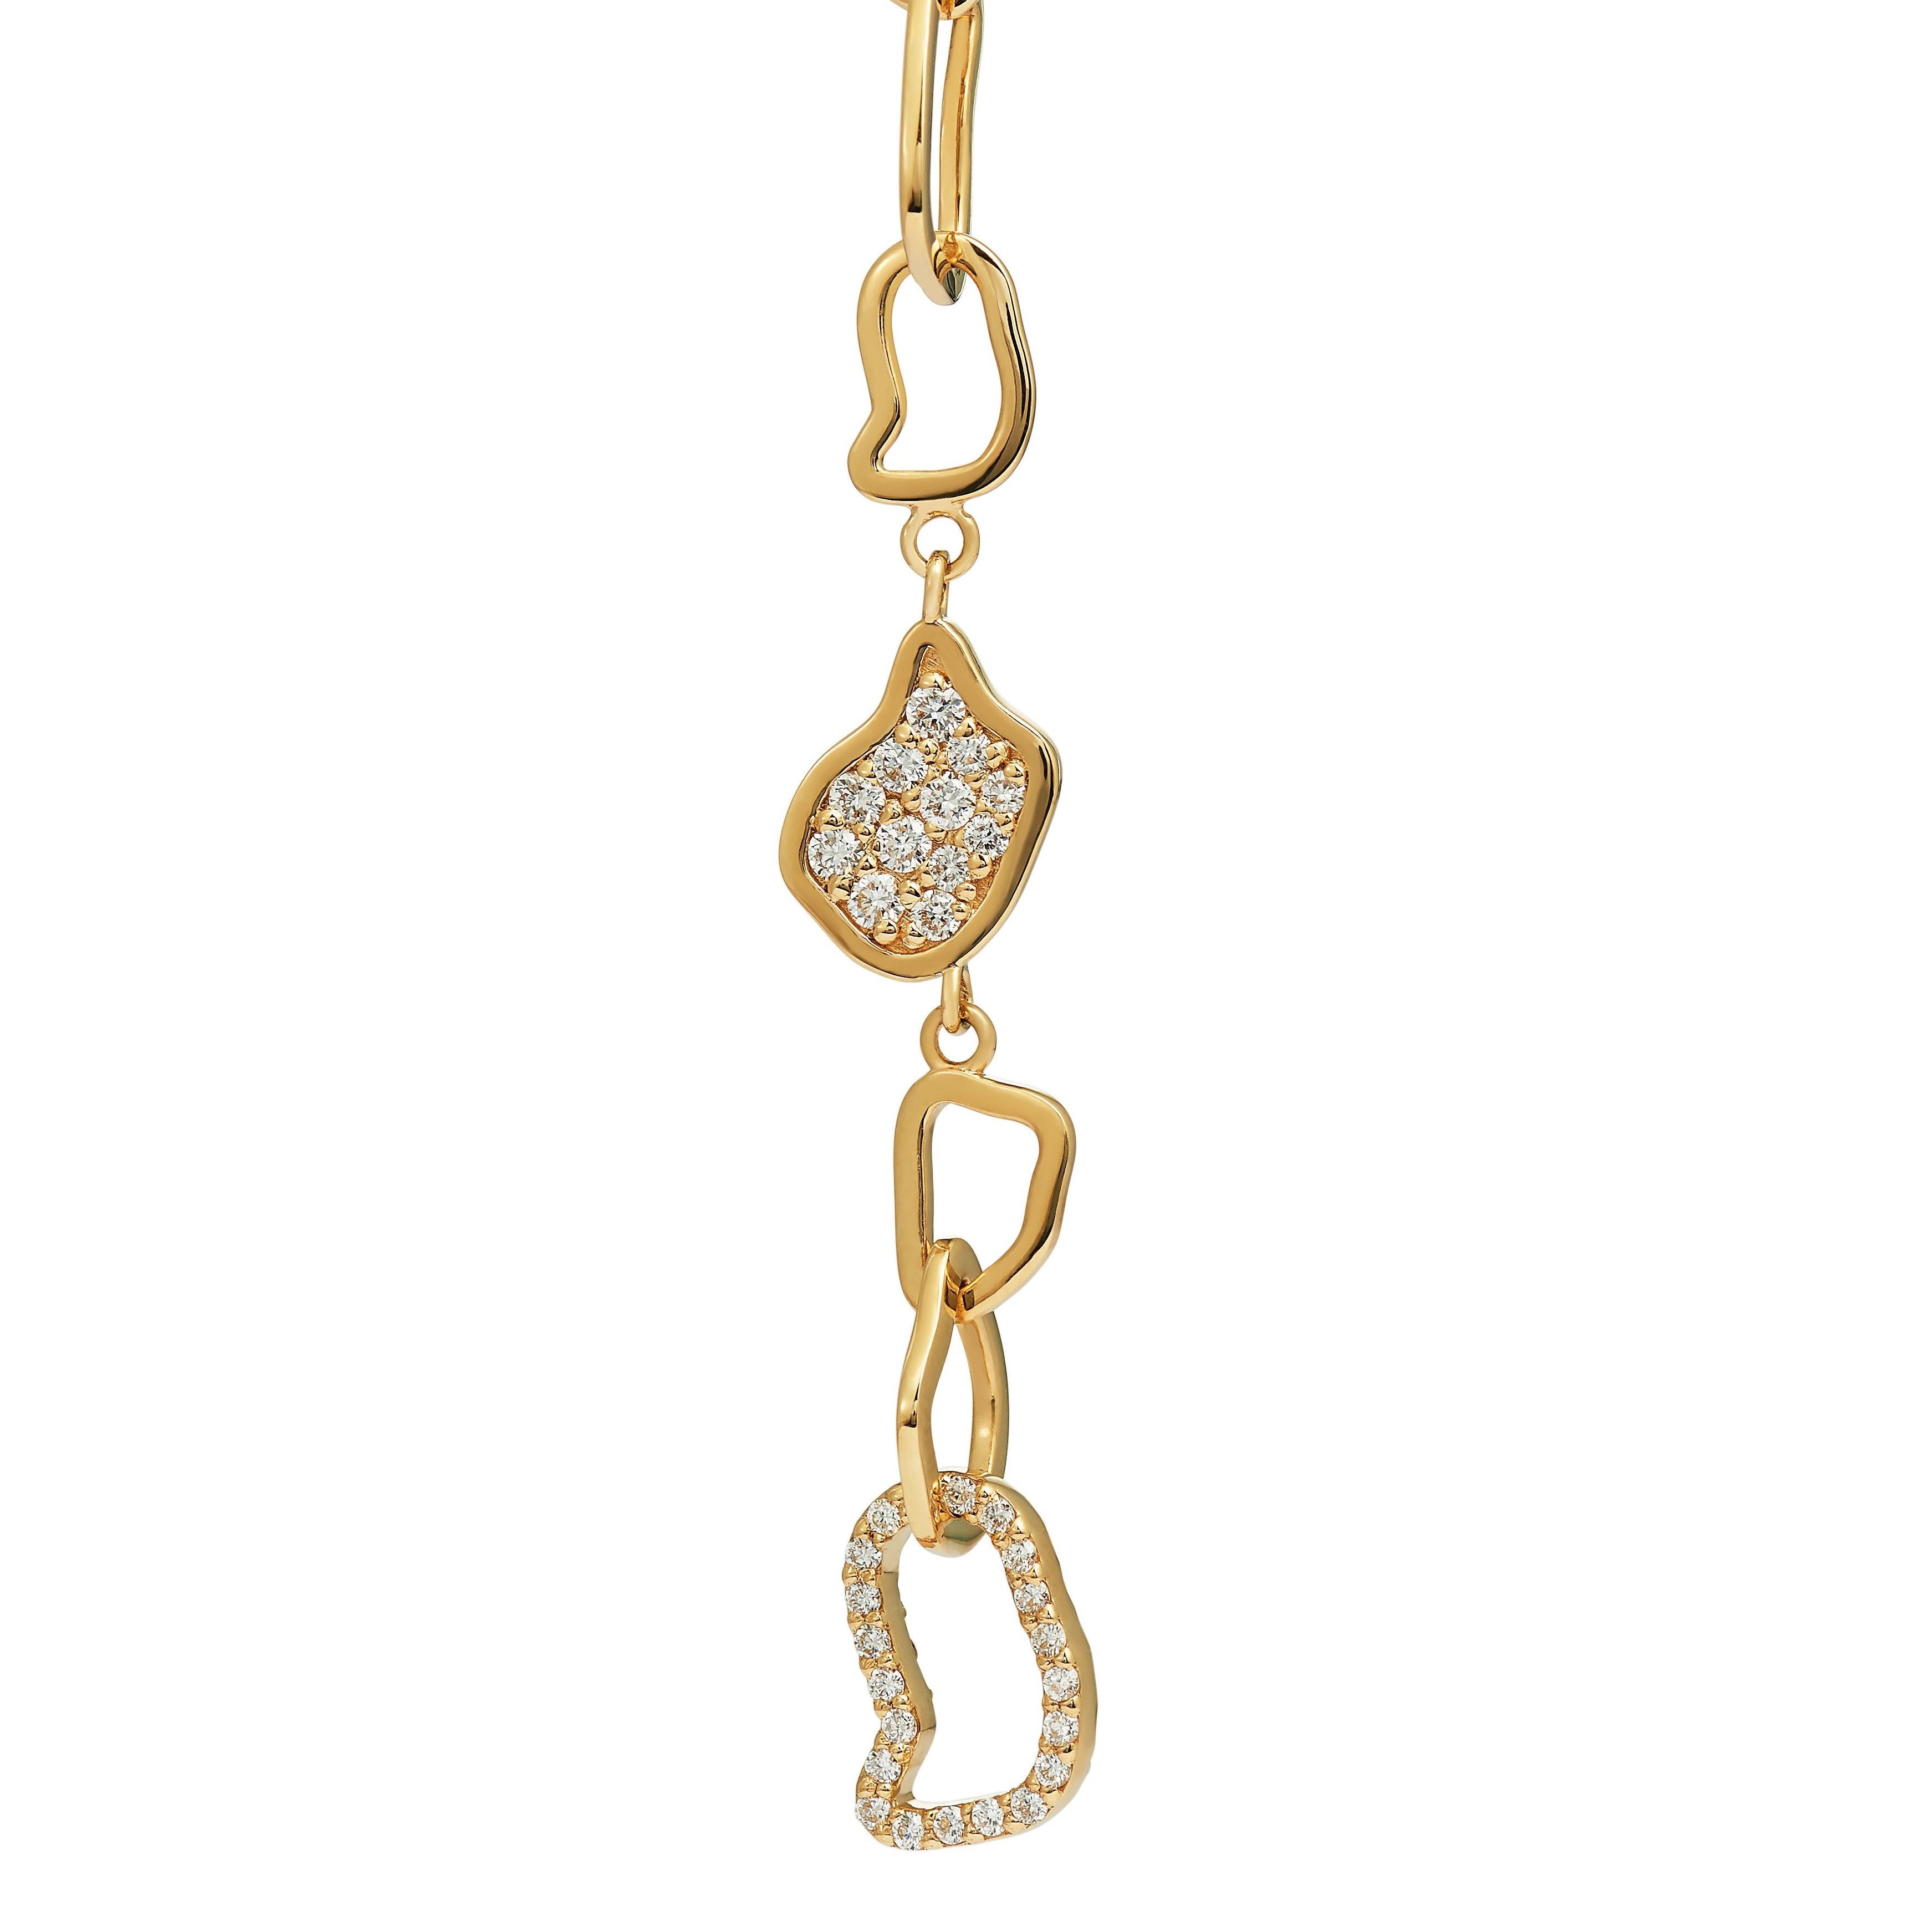 18 Karat Yellow Gold Drop Earrings Set With Diamonds

This pair of yellow gold diamond earrings will make any look a head-turner. Part of the Twiga collection, they feature intricate detail resembling the giraffe's spots and have an average gold